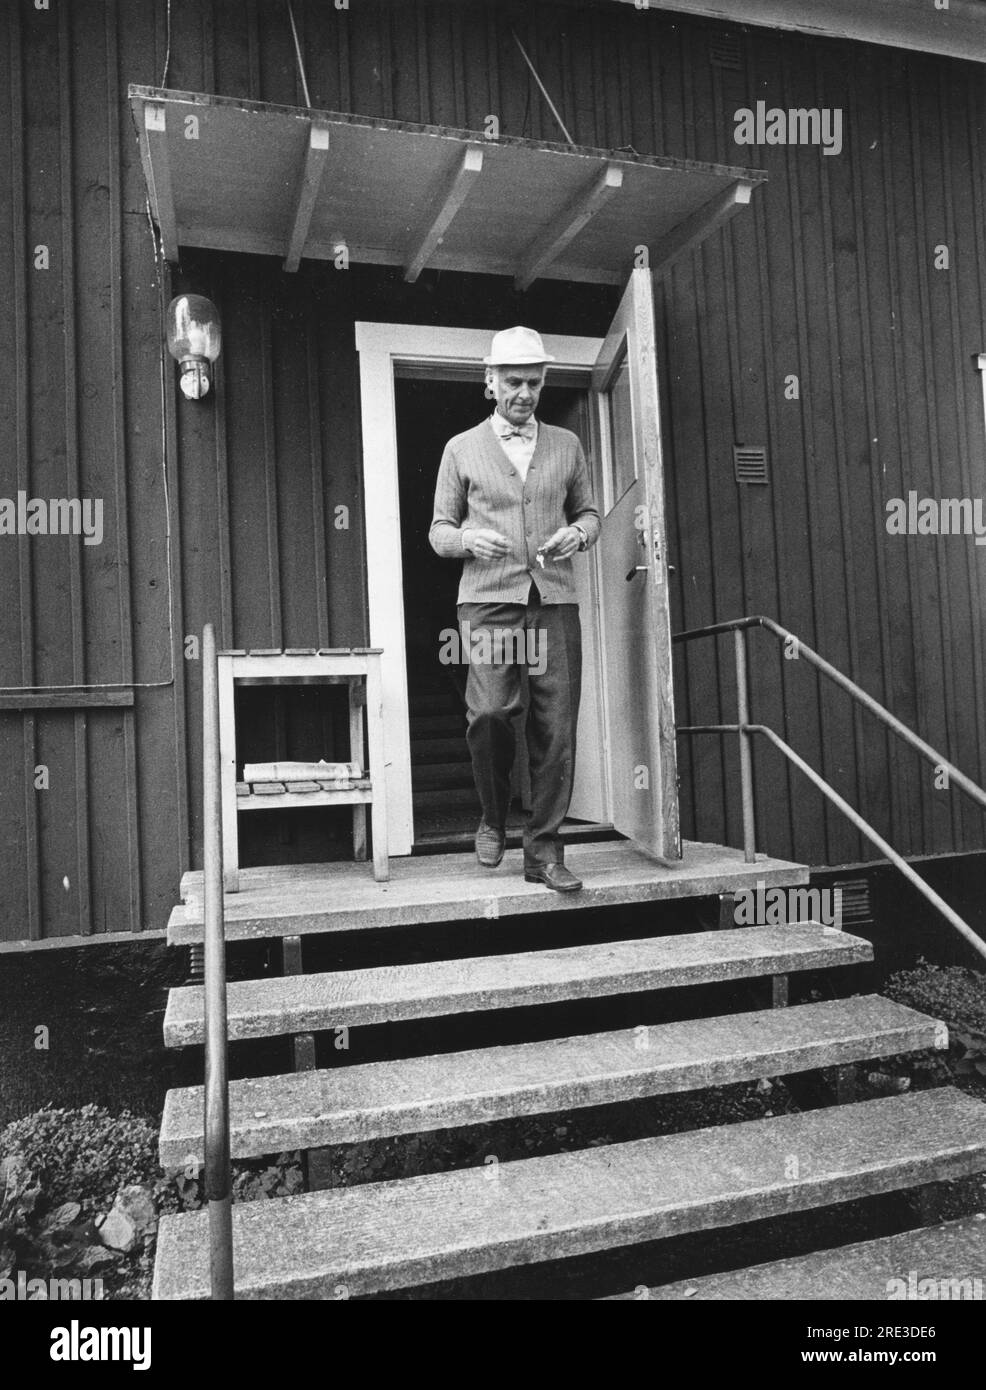 Wennerstroem, Stig, 27.8.1906 - 22.3.2006, Swedish officer and spy for the USSR, ADDITIONAL-RIGHTS-CLEARANCE-INFO-NOT-AVAILABLE Stock Photo